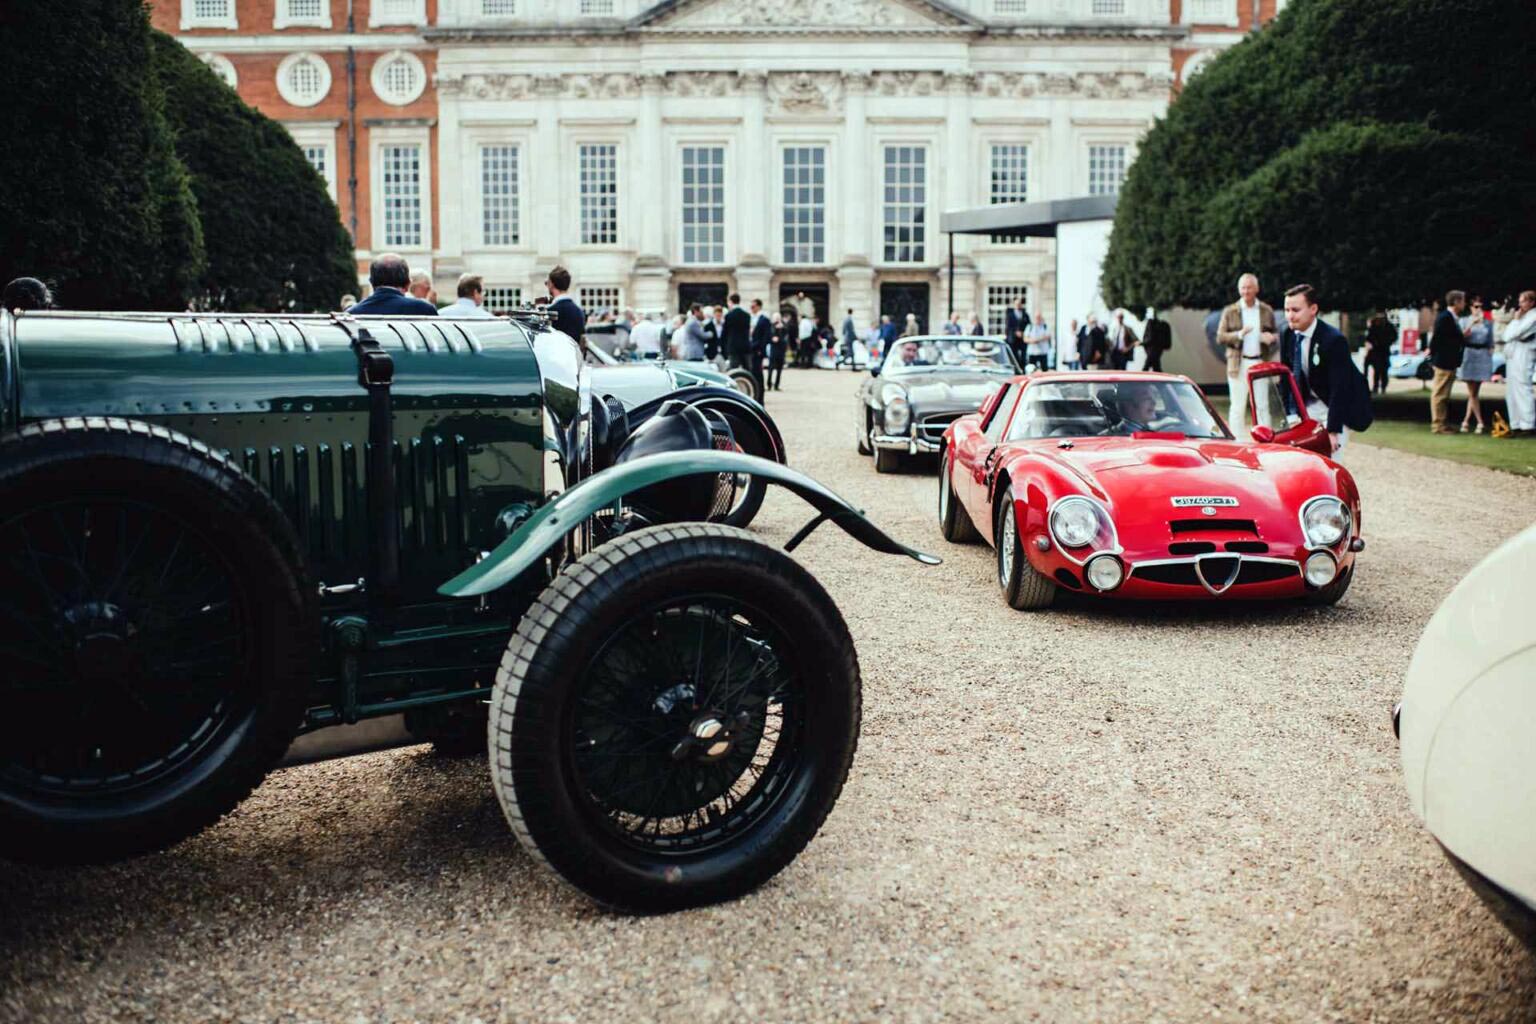 Concours of Elegance 2021